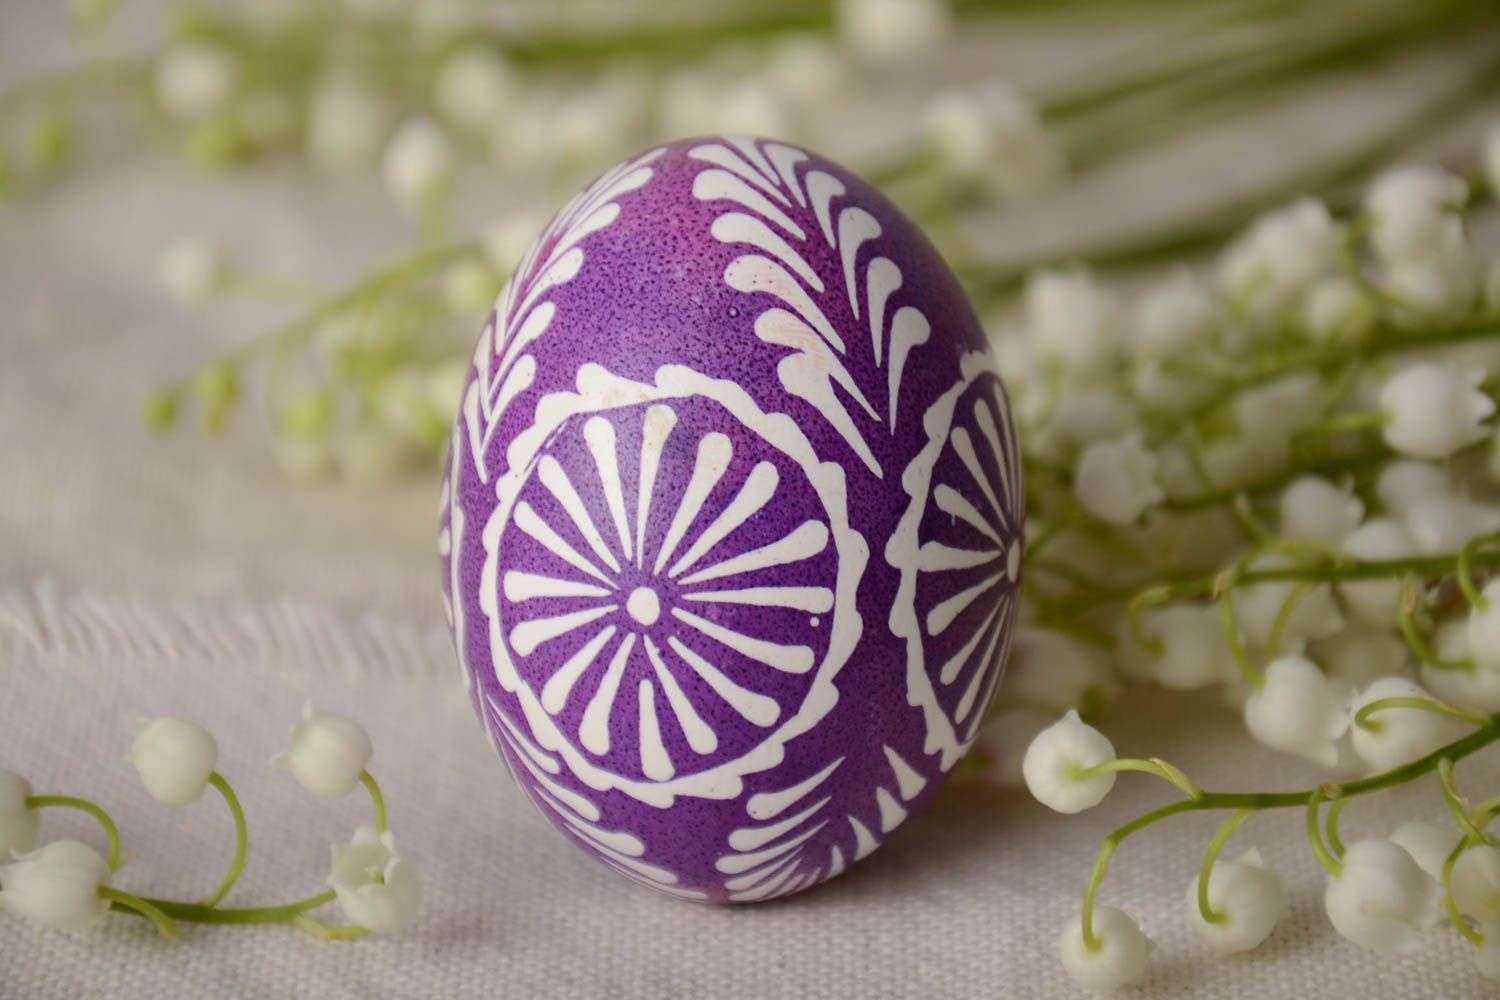 Handmade decorative violet and white Easter egg painted in Lemkiv style photo 1